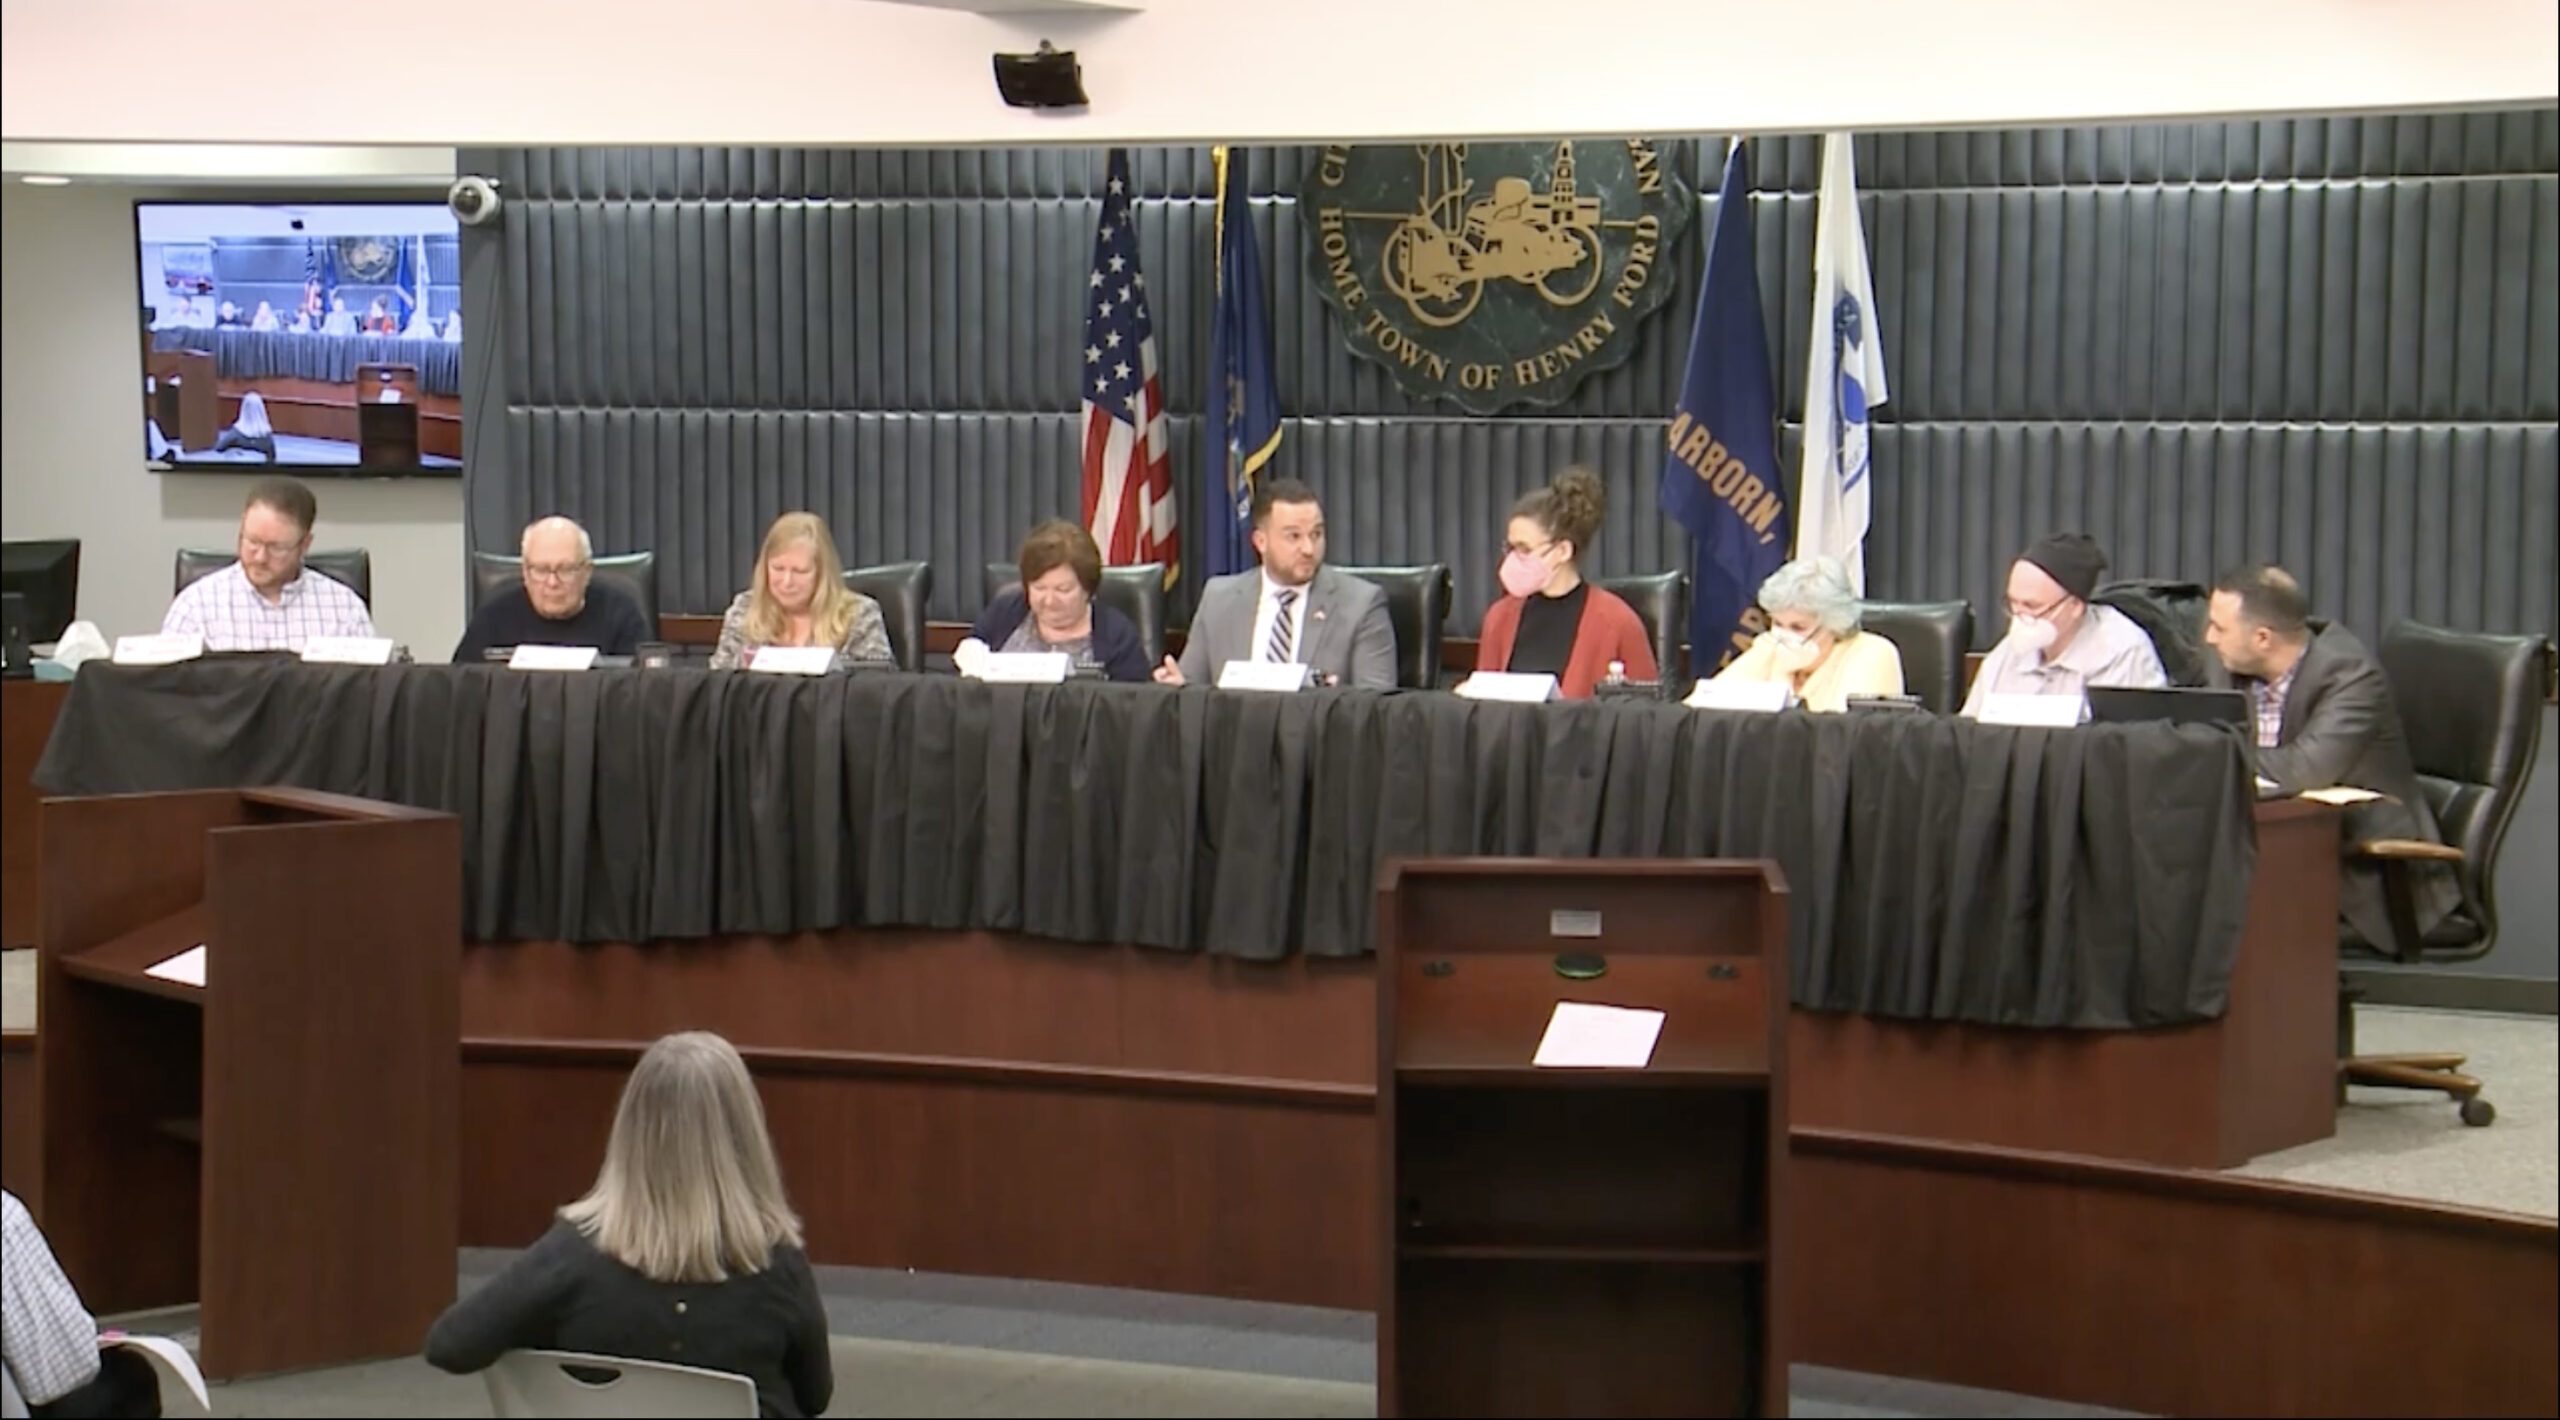 Charter Commission meeting on April 7, 2022 – Videograb